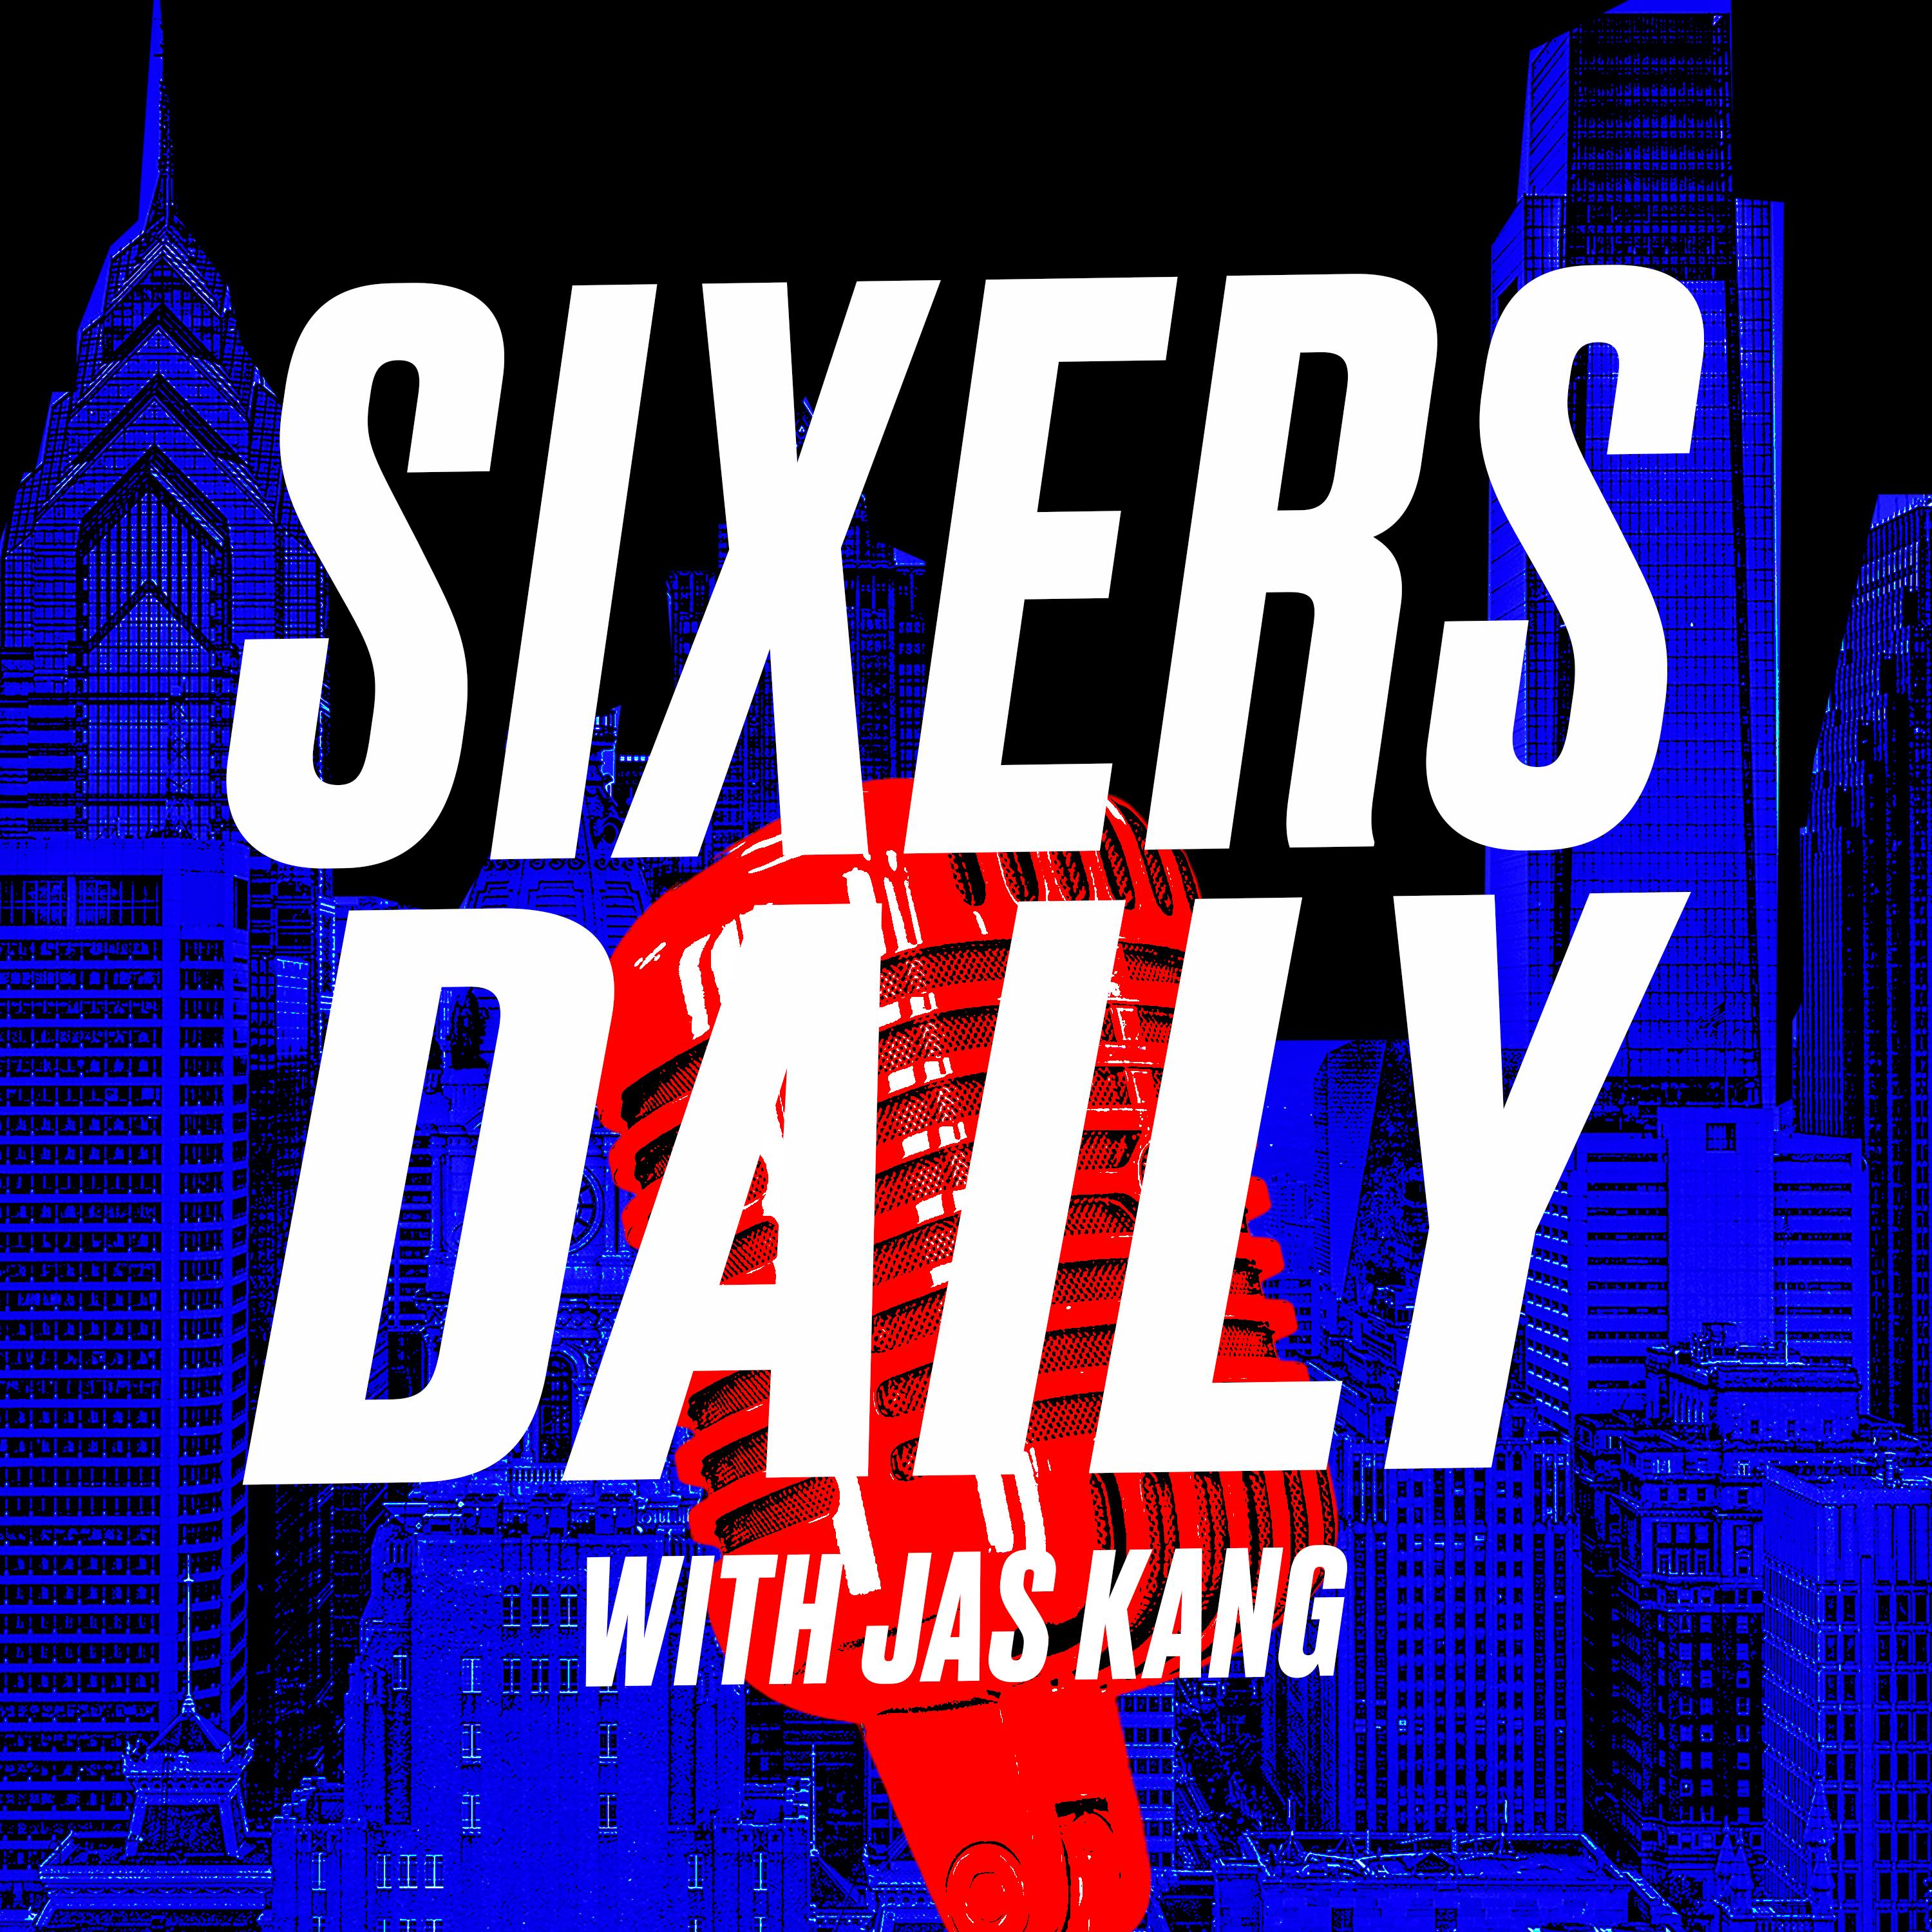 Sixers Daily with Jas Kang - The Celtics are dealing with drama heading into the regular season. Plus, what is a Boston perspective of the revamped Philly squad? With Adam Taylor of Celtics Blog.